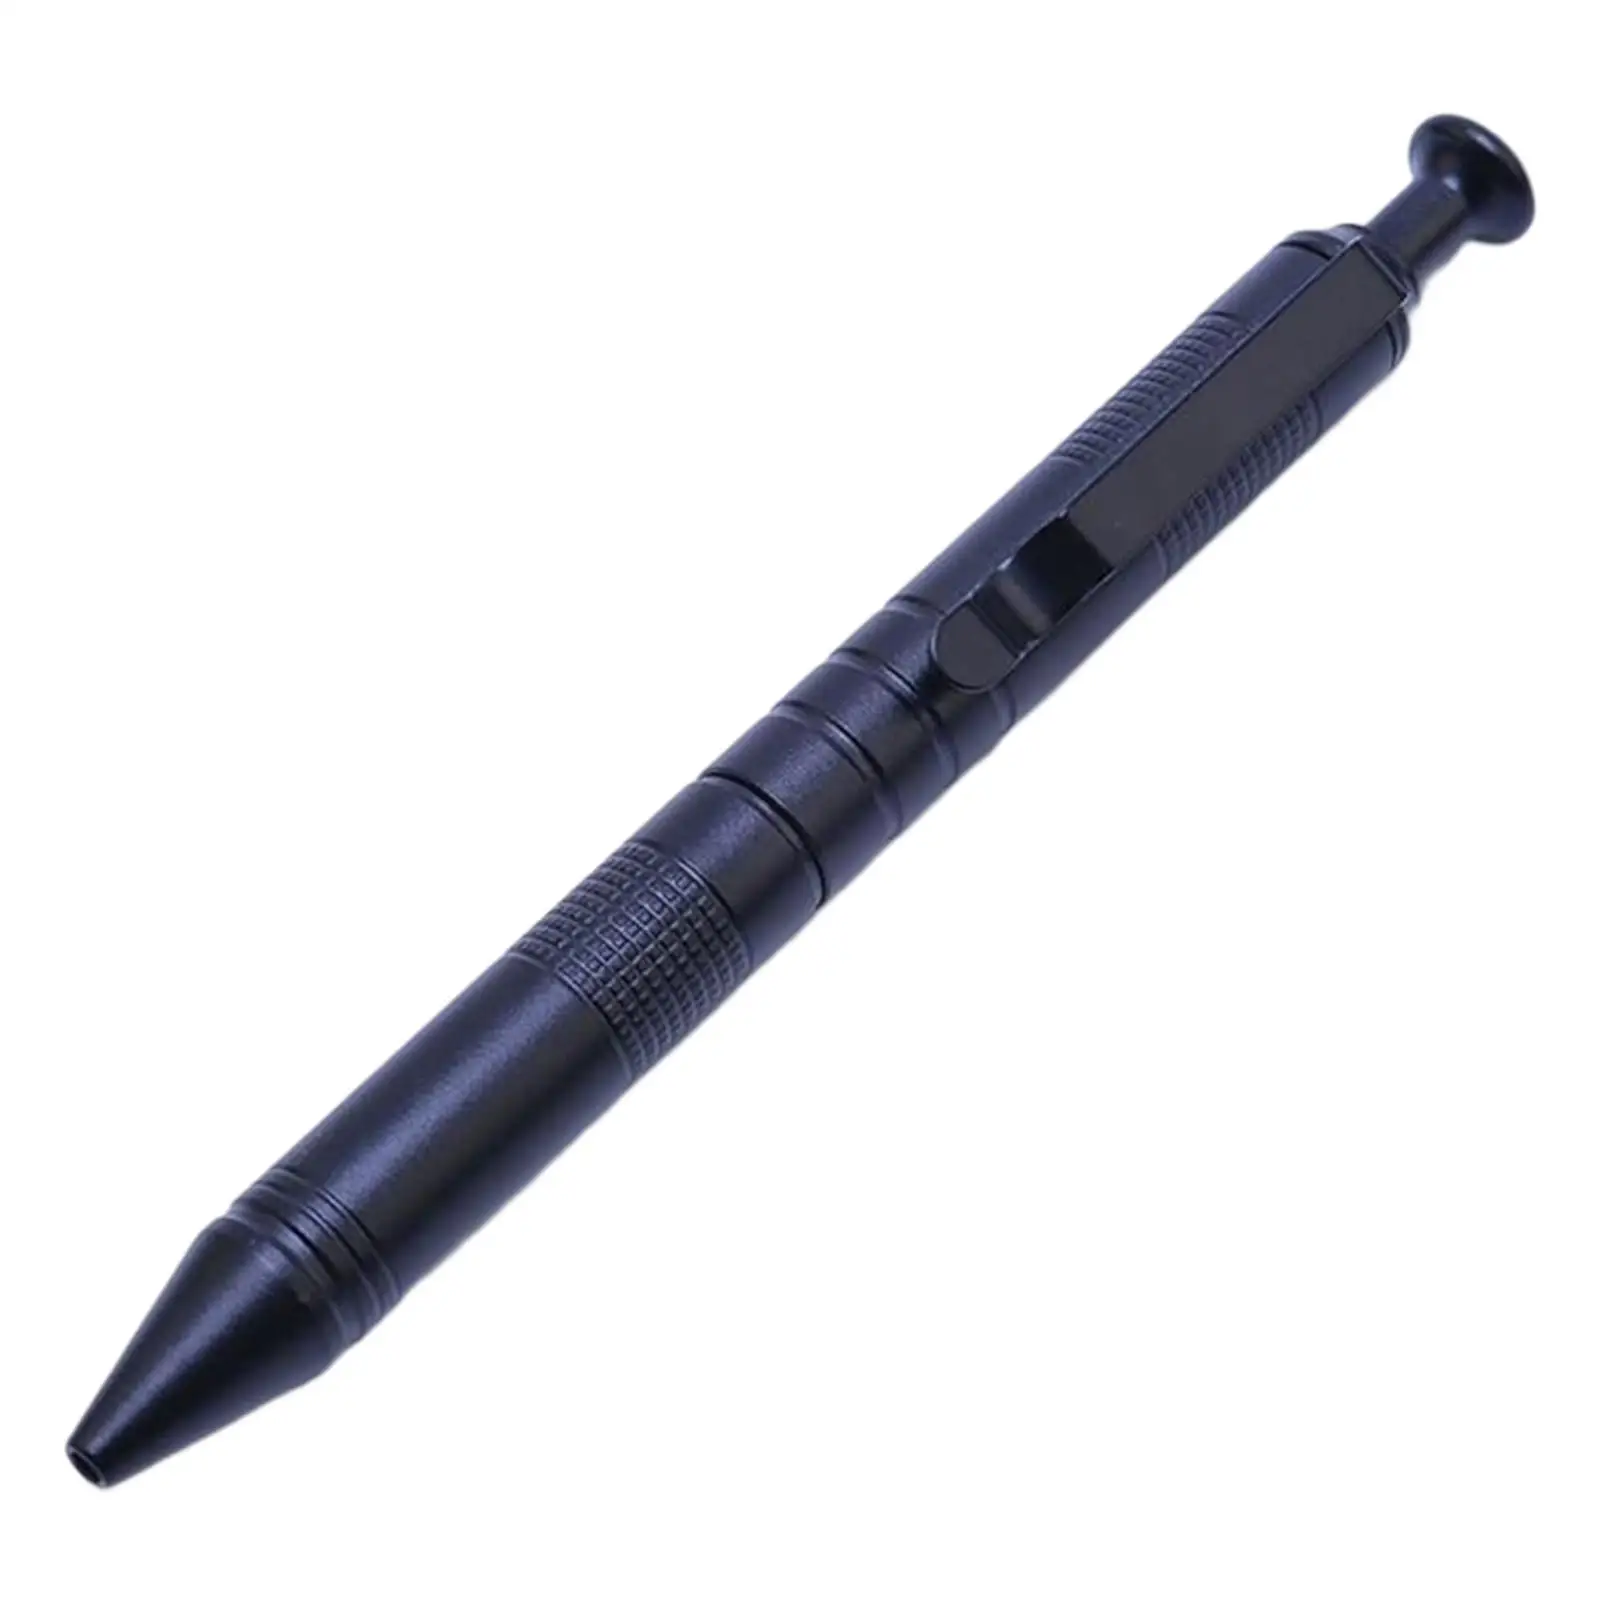 Sign pens Outdoor Sports Accessories Supplies Multitool self defensa Camping Gear Sturdy Pocket emergencies ploy Ballpoint Pen